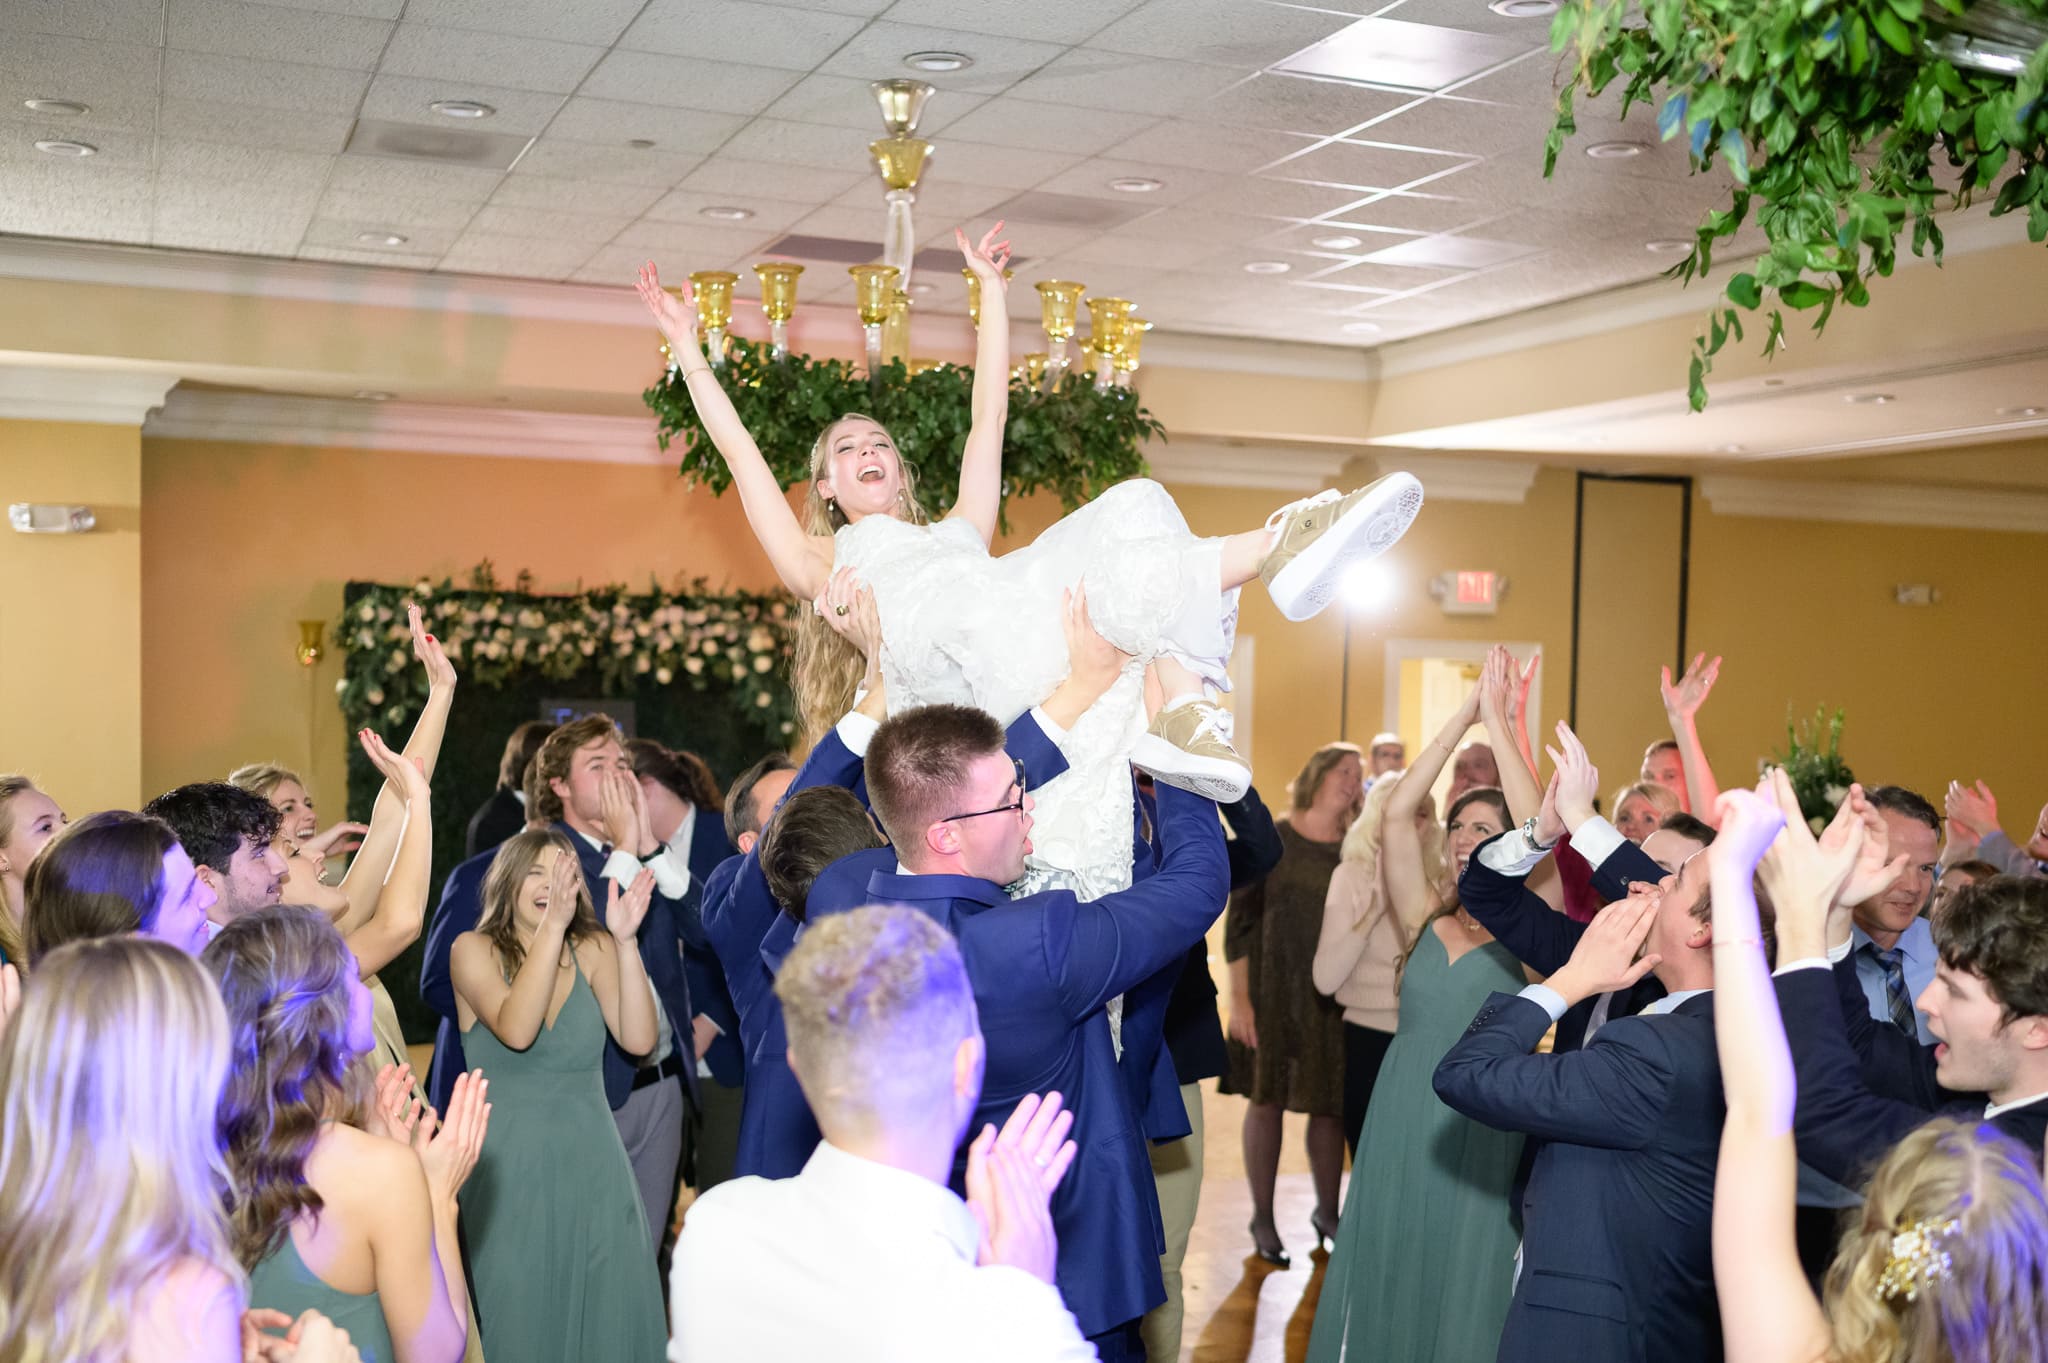 Lifting bride into the air on the dance floor - Pawleys Plantation Golf & Country Club